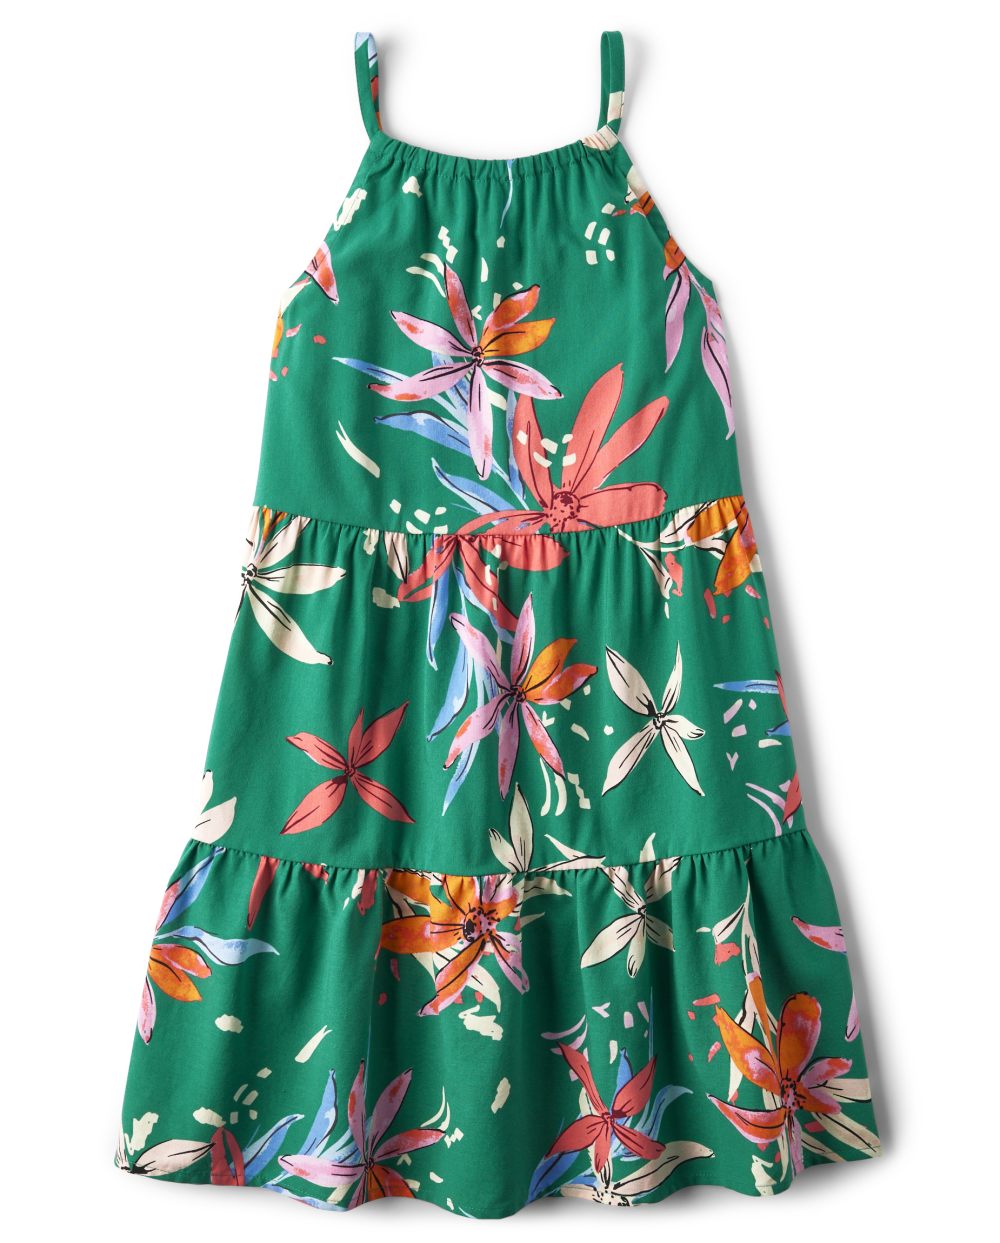 Girls Tiered Above the Knee Floral Tropical Print Sleeveless Halter Dress